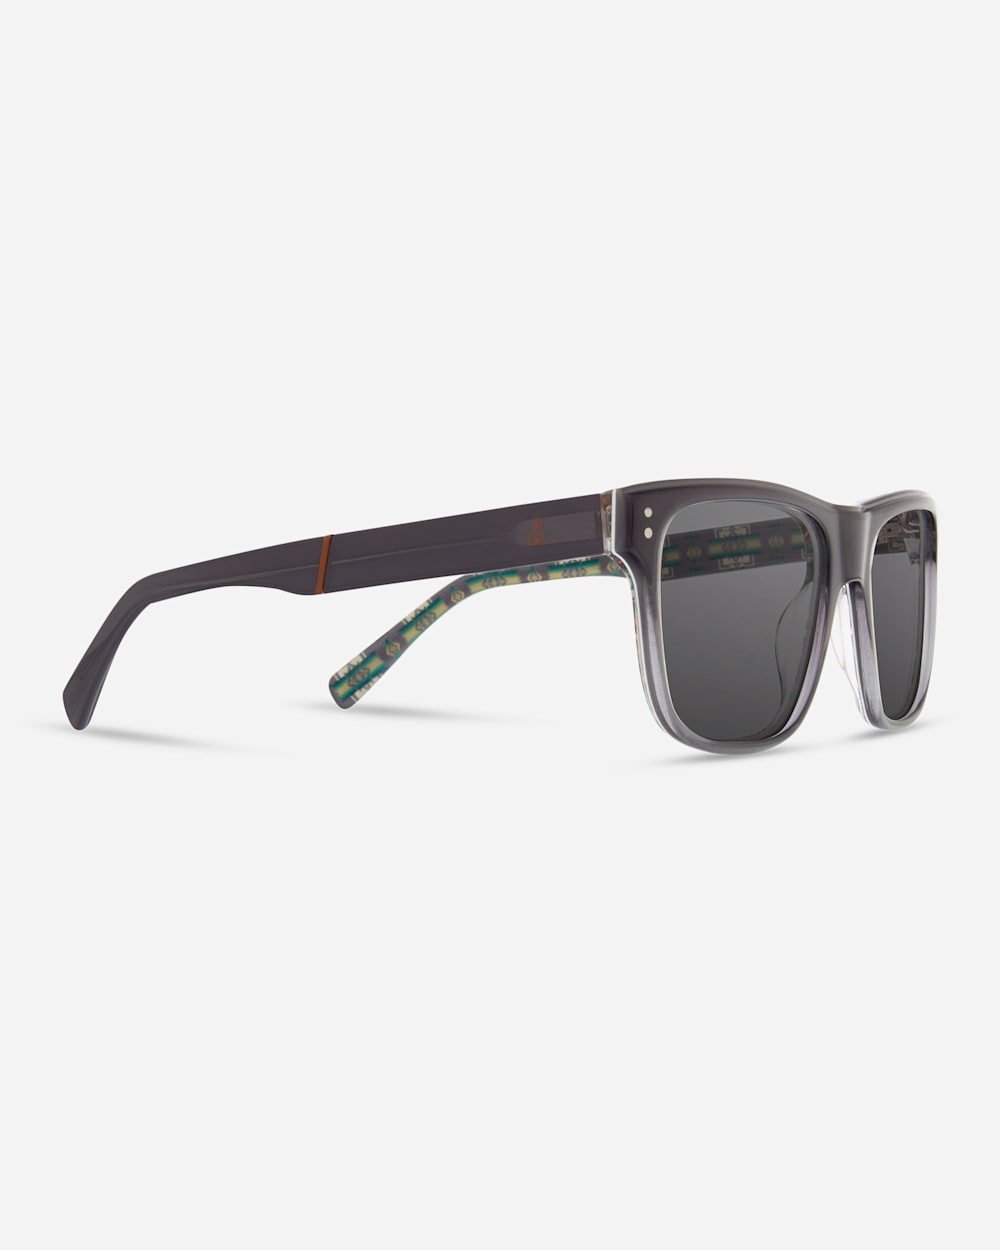 ADDITIONAL VIEW OF SHWOOD X PENDLETON MONROE SUNGLASSES IN CHIEF JOSEPH GREY image number 2